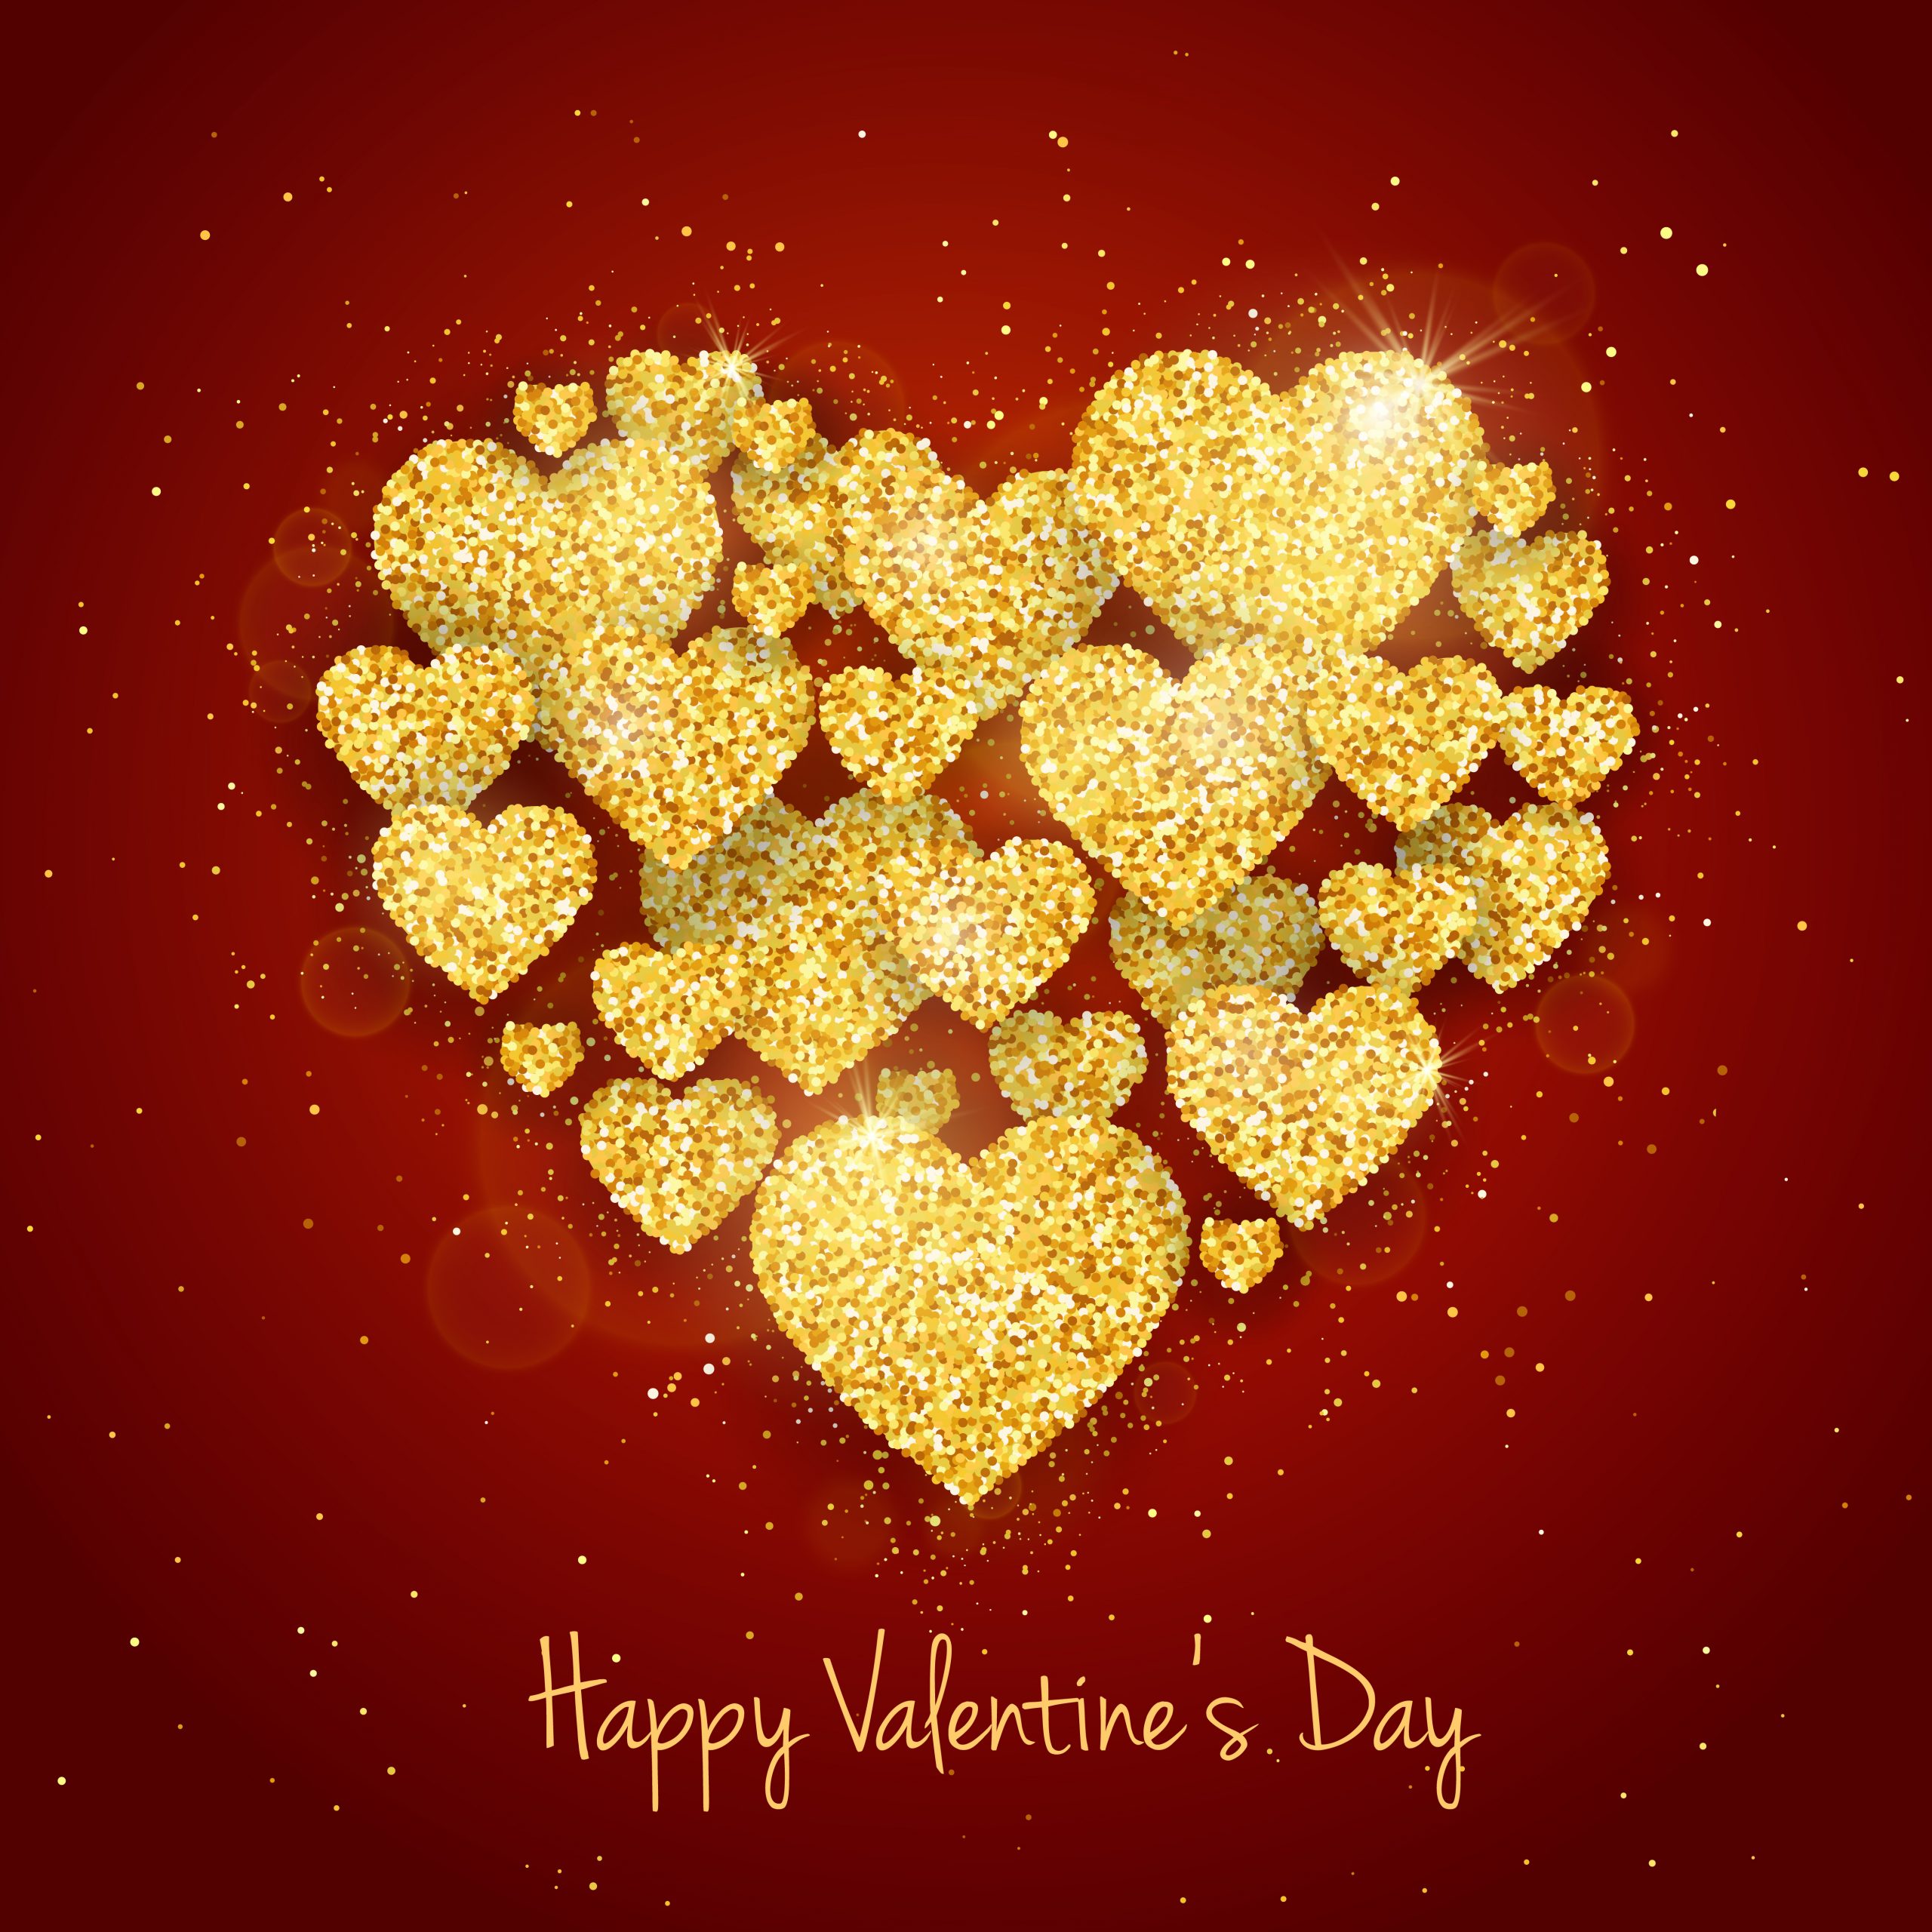 Beautiful Images Of Happy Valentines Day For Facebook  Happy valentines  day wishes, Happy valentines day images, Happy valentines day pictures